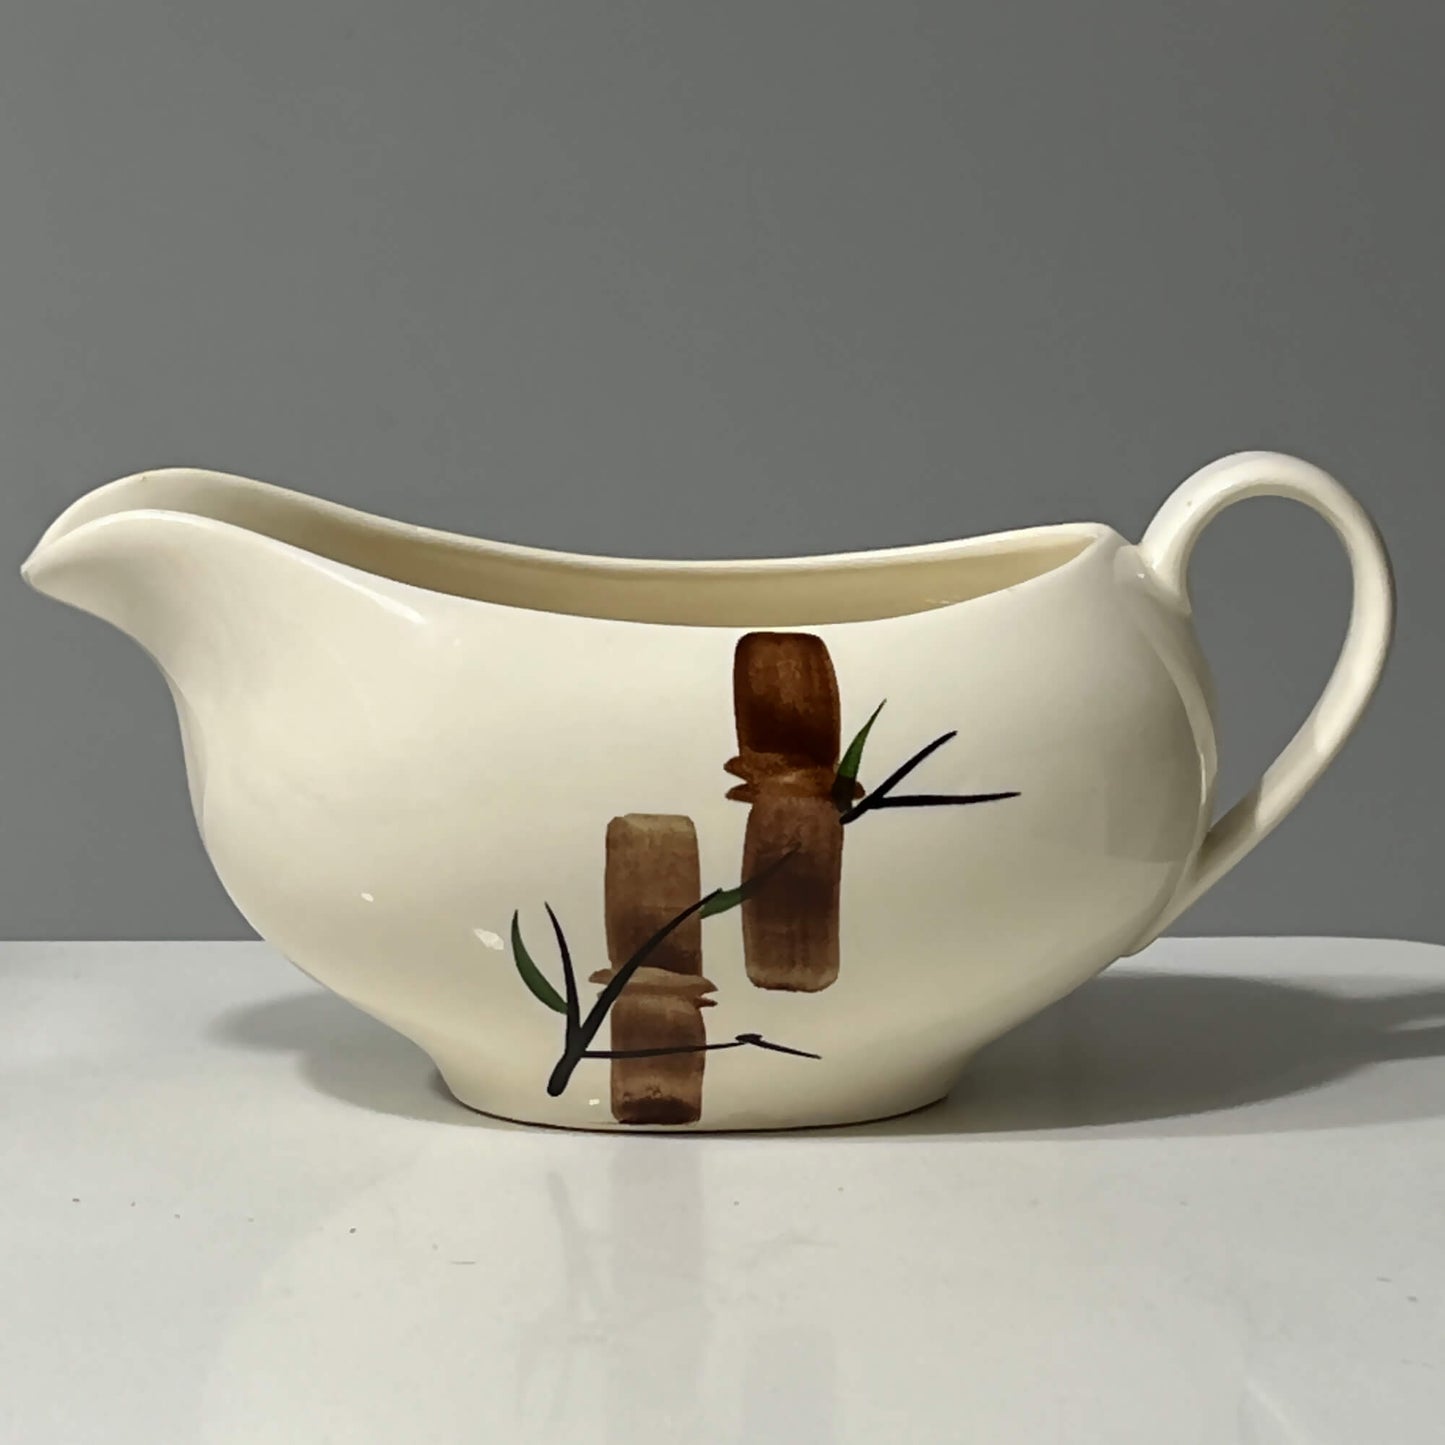 American-Heritage-China-Gravy-Boat-by-Stetson.-Bamboo-Pattern_Side-View.-Shop-eBargainsAndDeals.com